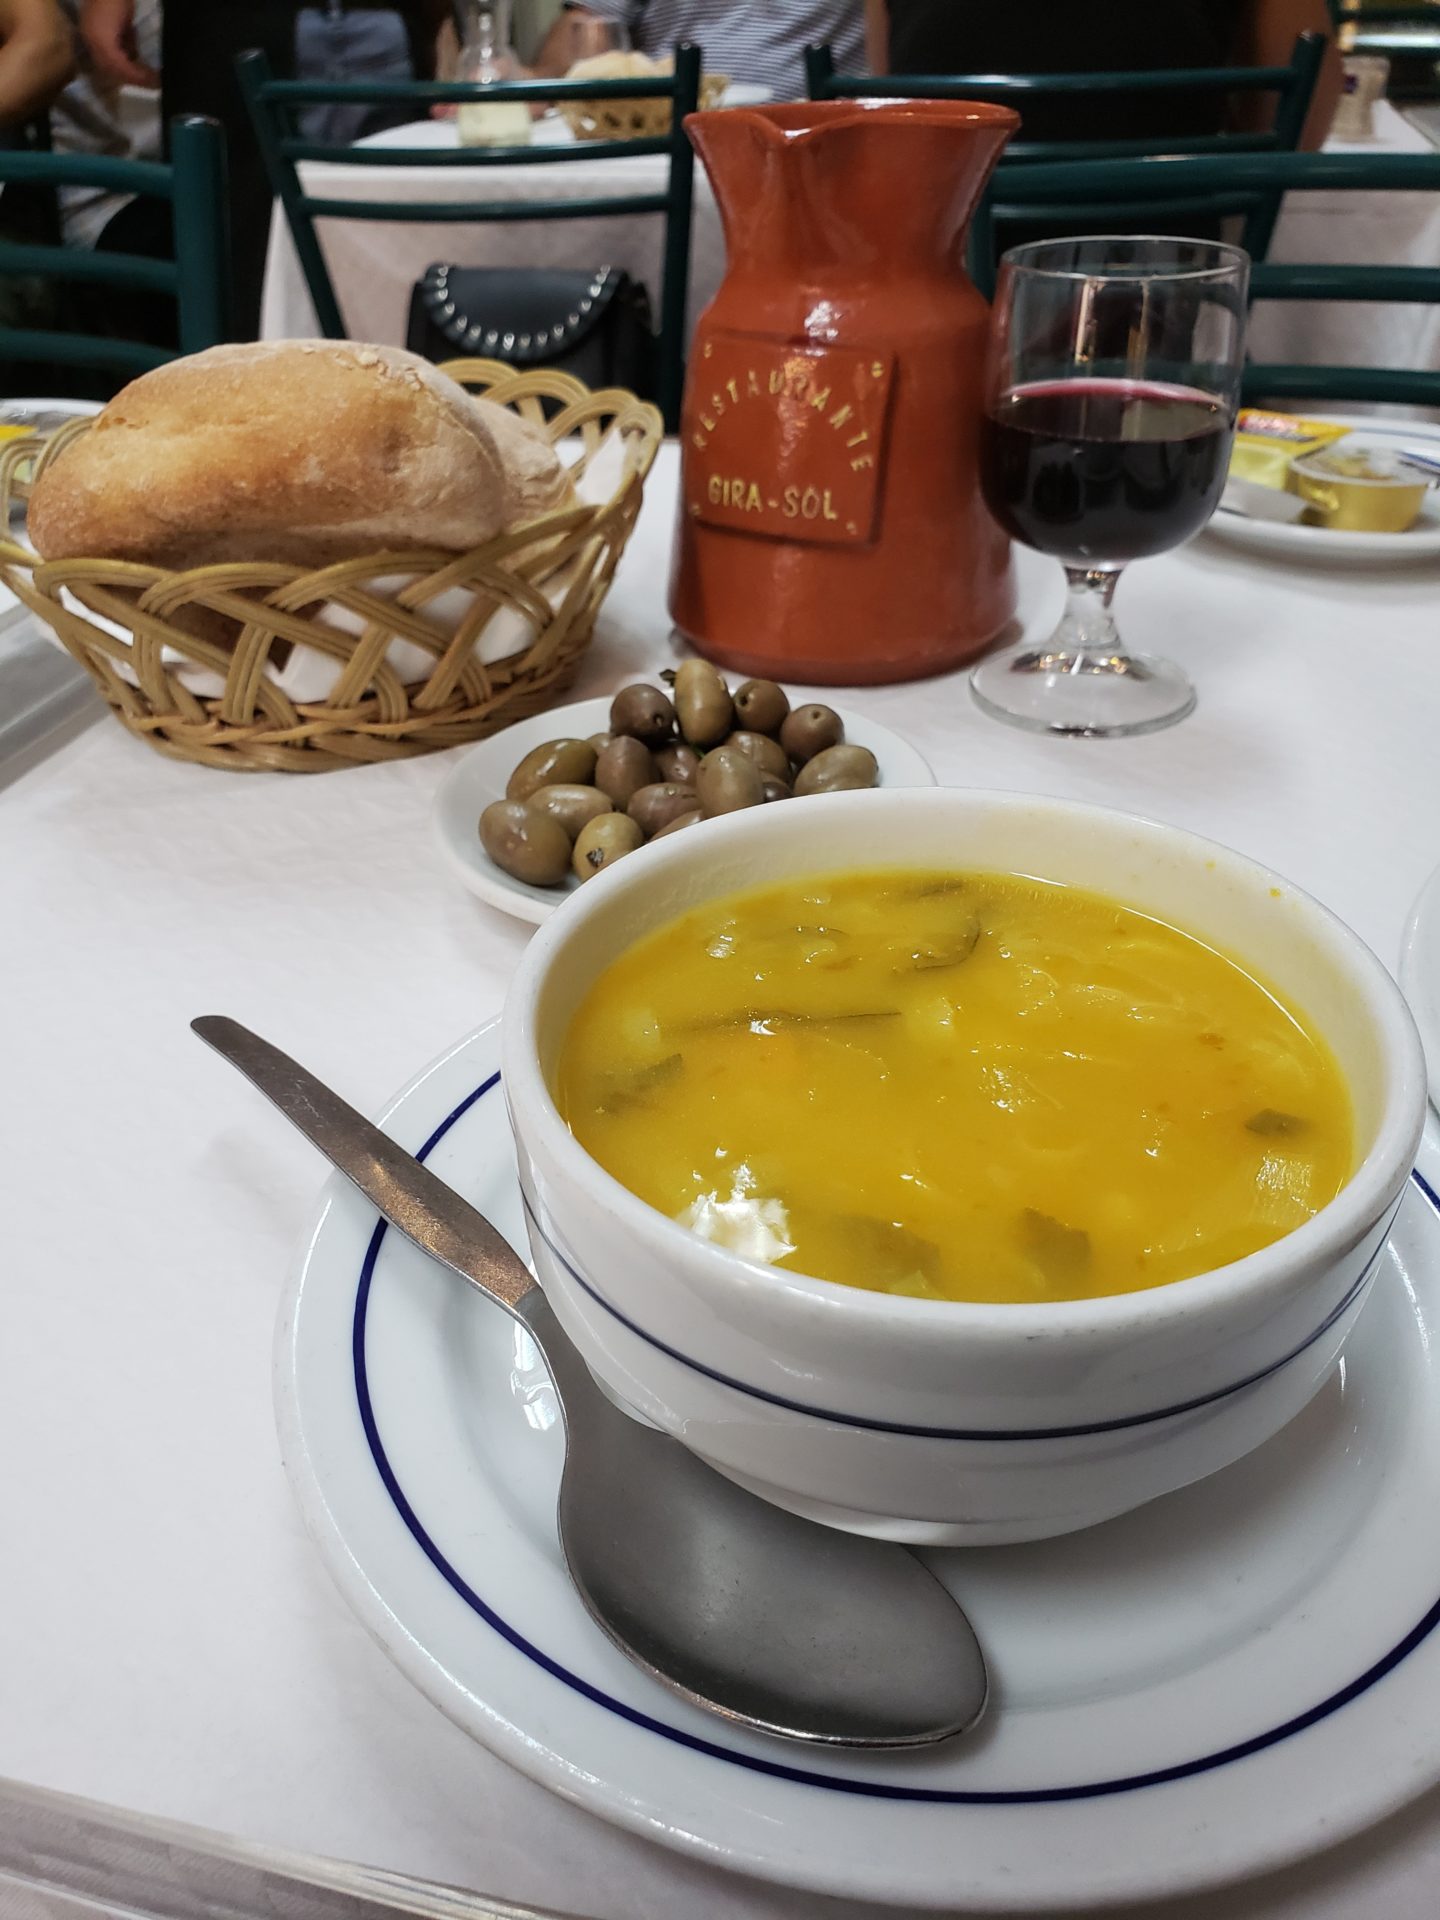 a bowl of soup and bread on a table